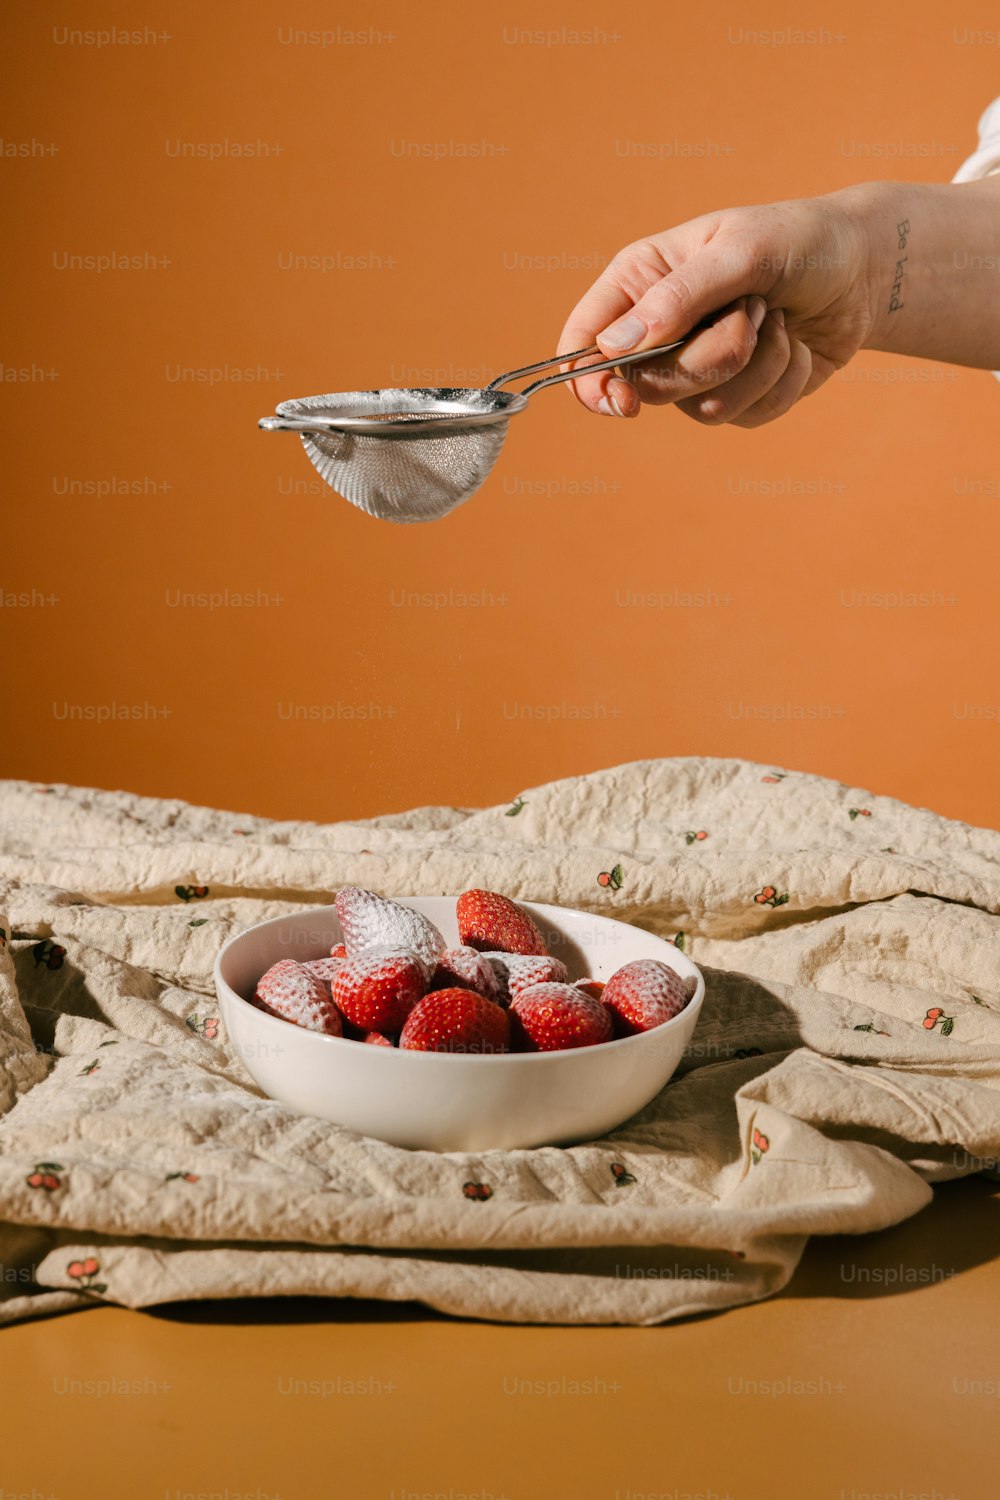 a bowl of strawberries on a table with a person holding a spoon